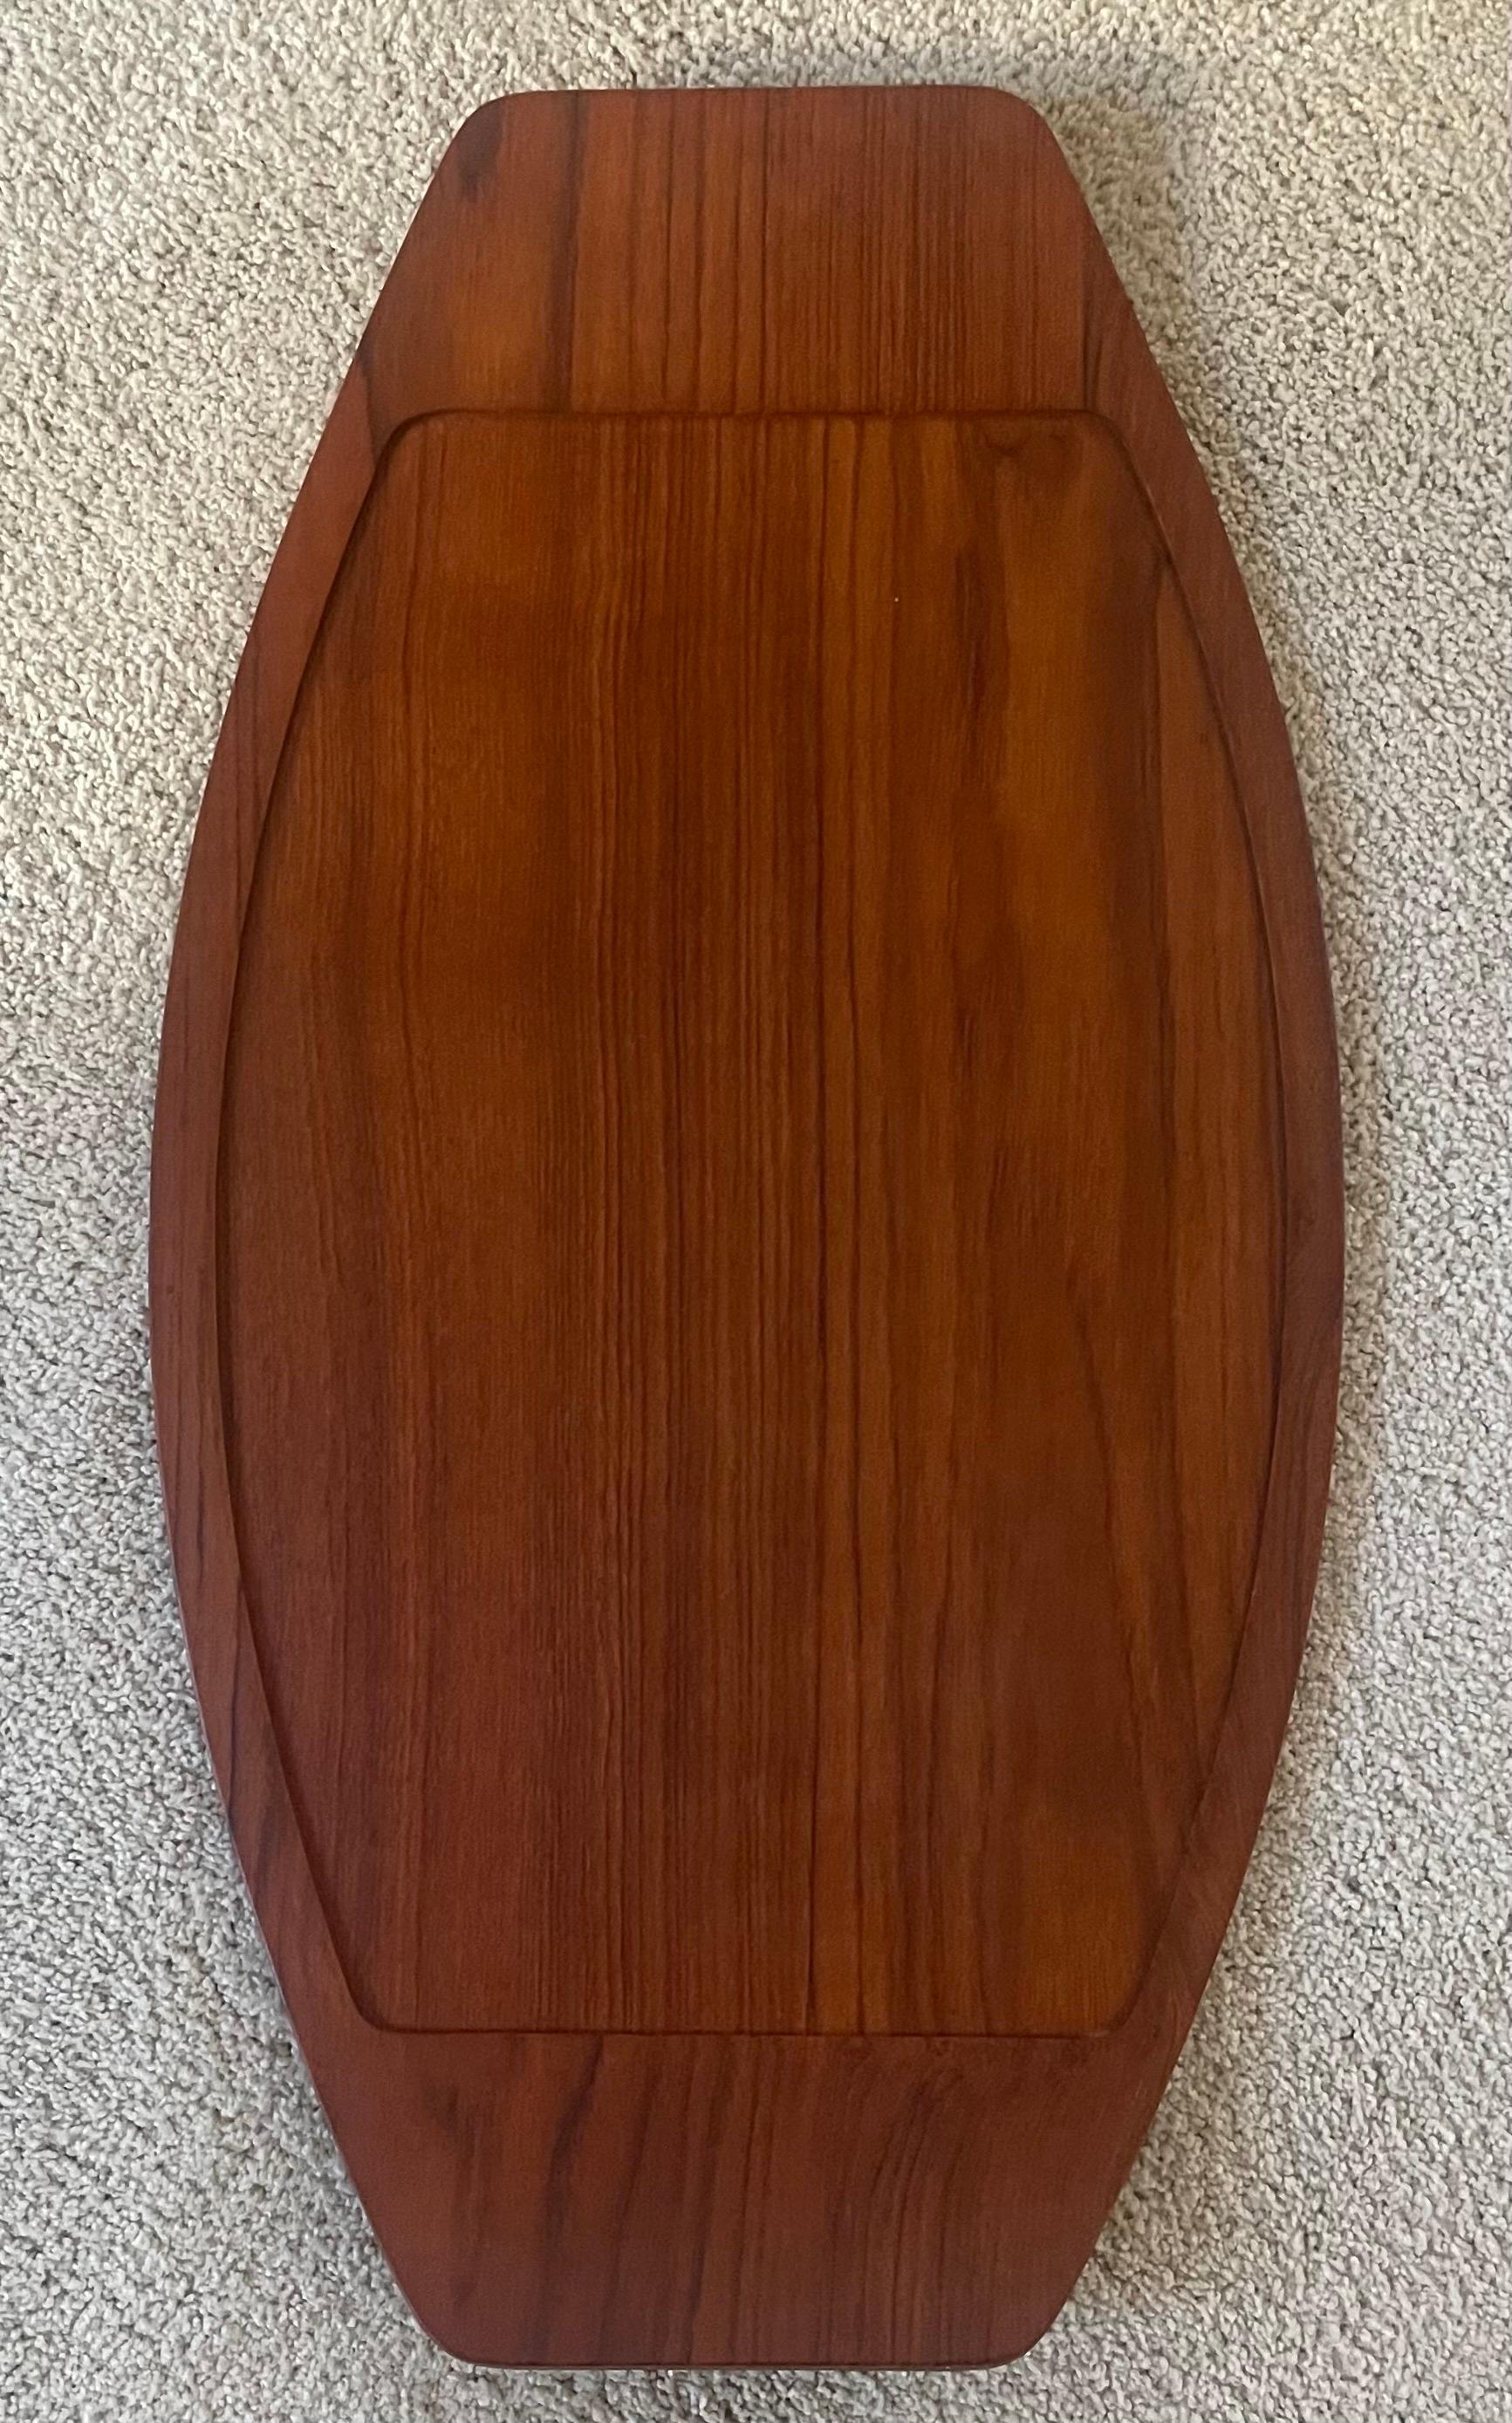 Danish Large Solid Teak Surfboard Tray with Raised Edge by Digsmed - Rare For Sale